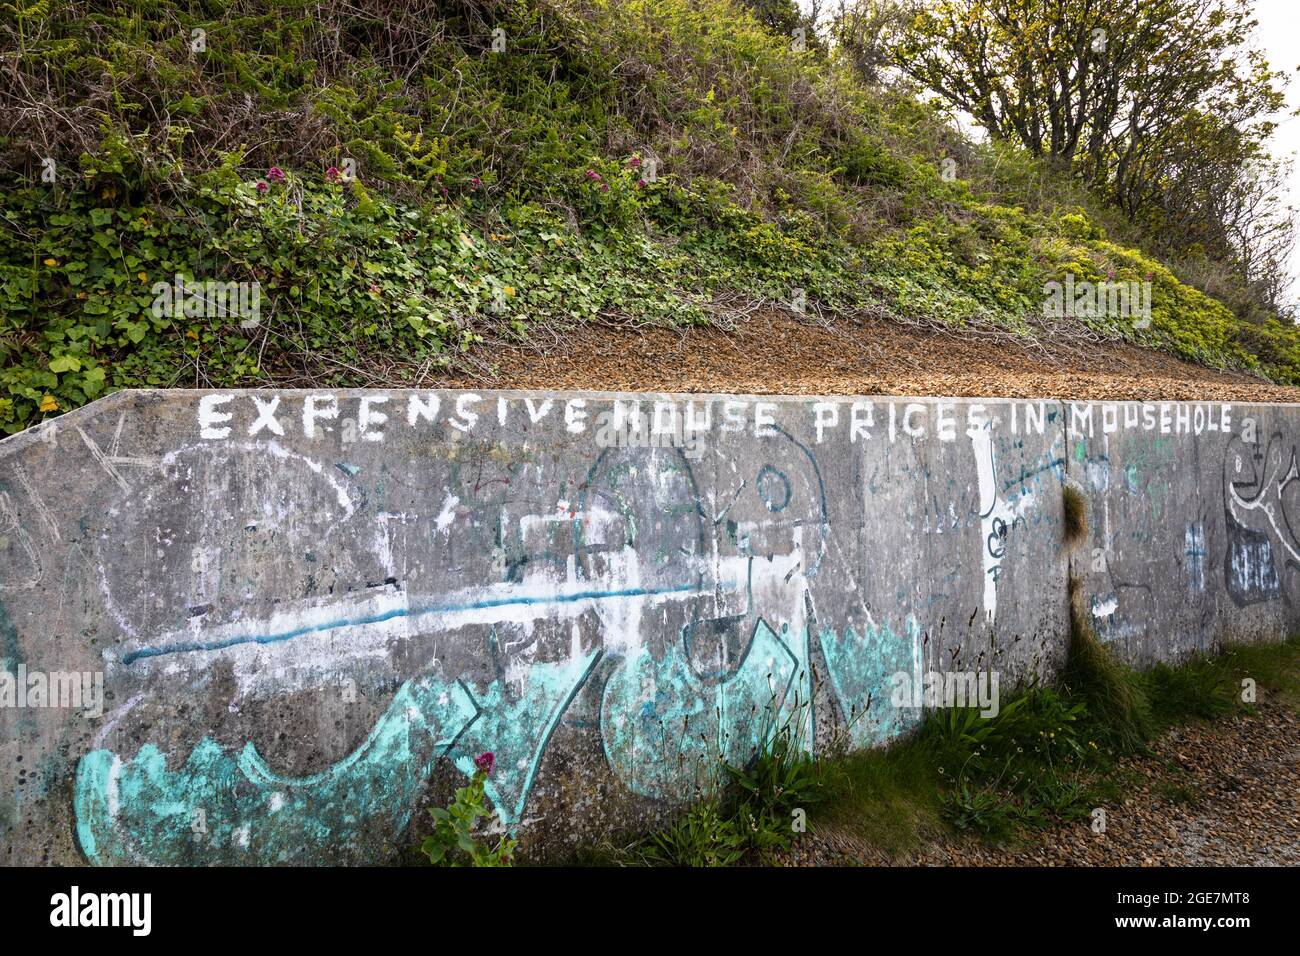 Graffiti on a wall alongside a footpath, complaining about local house prices, Mousehole, Cornwall, England. Stock Photo